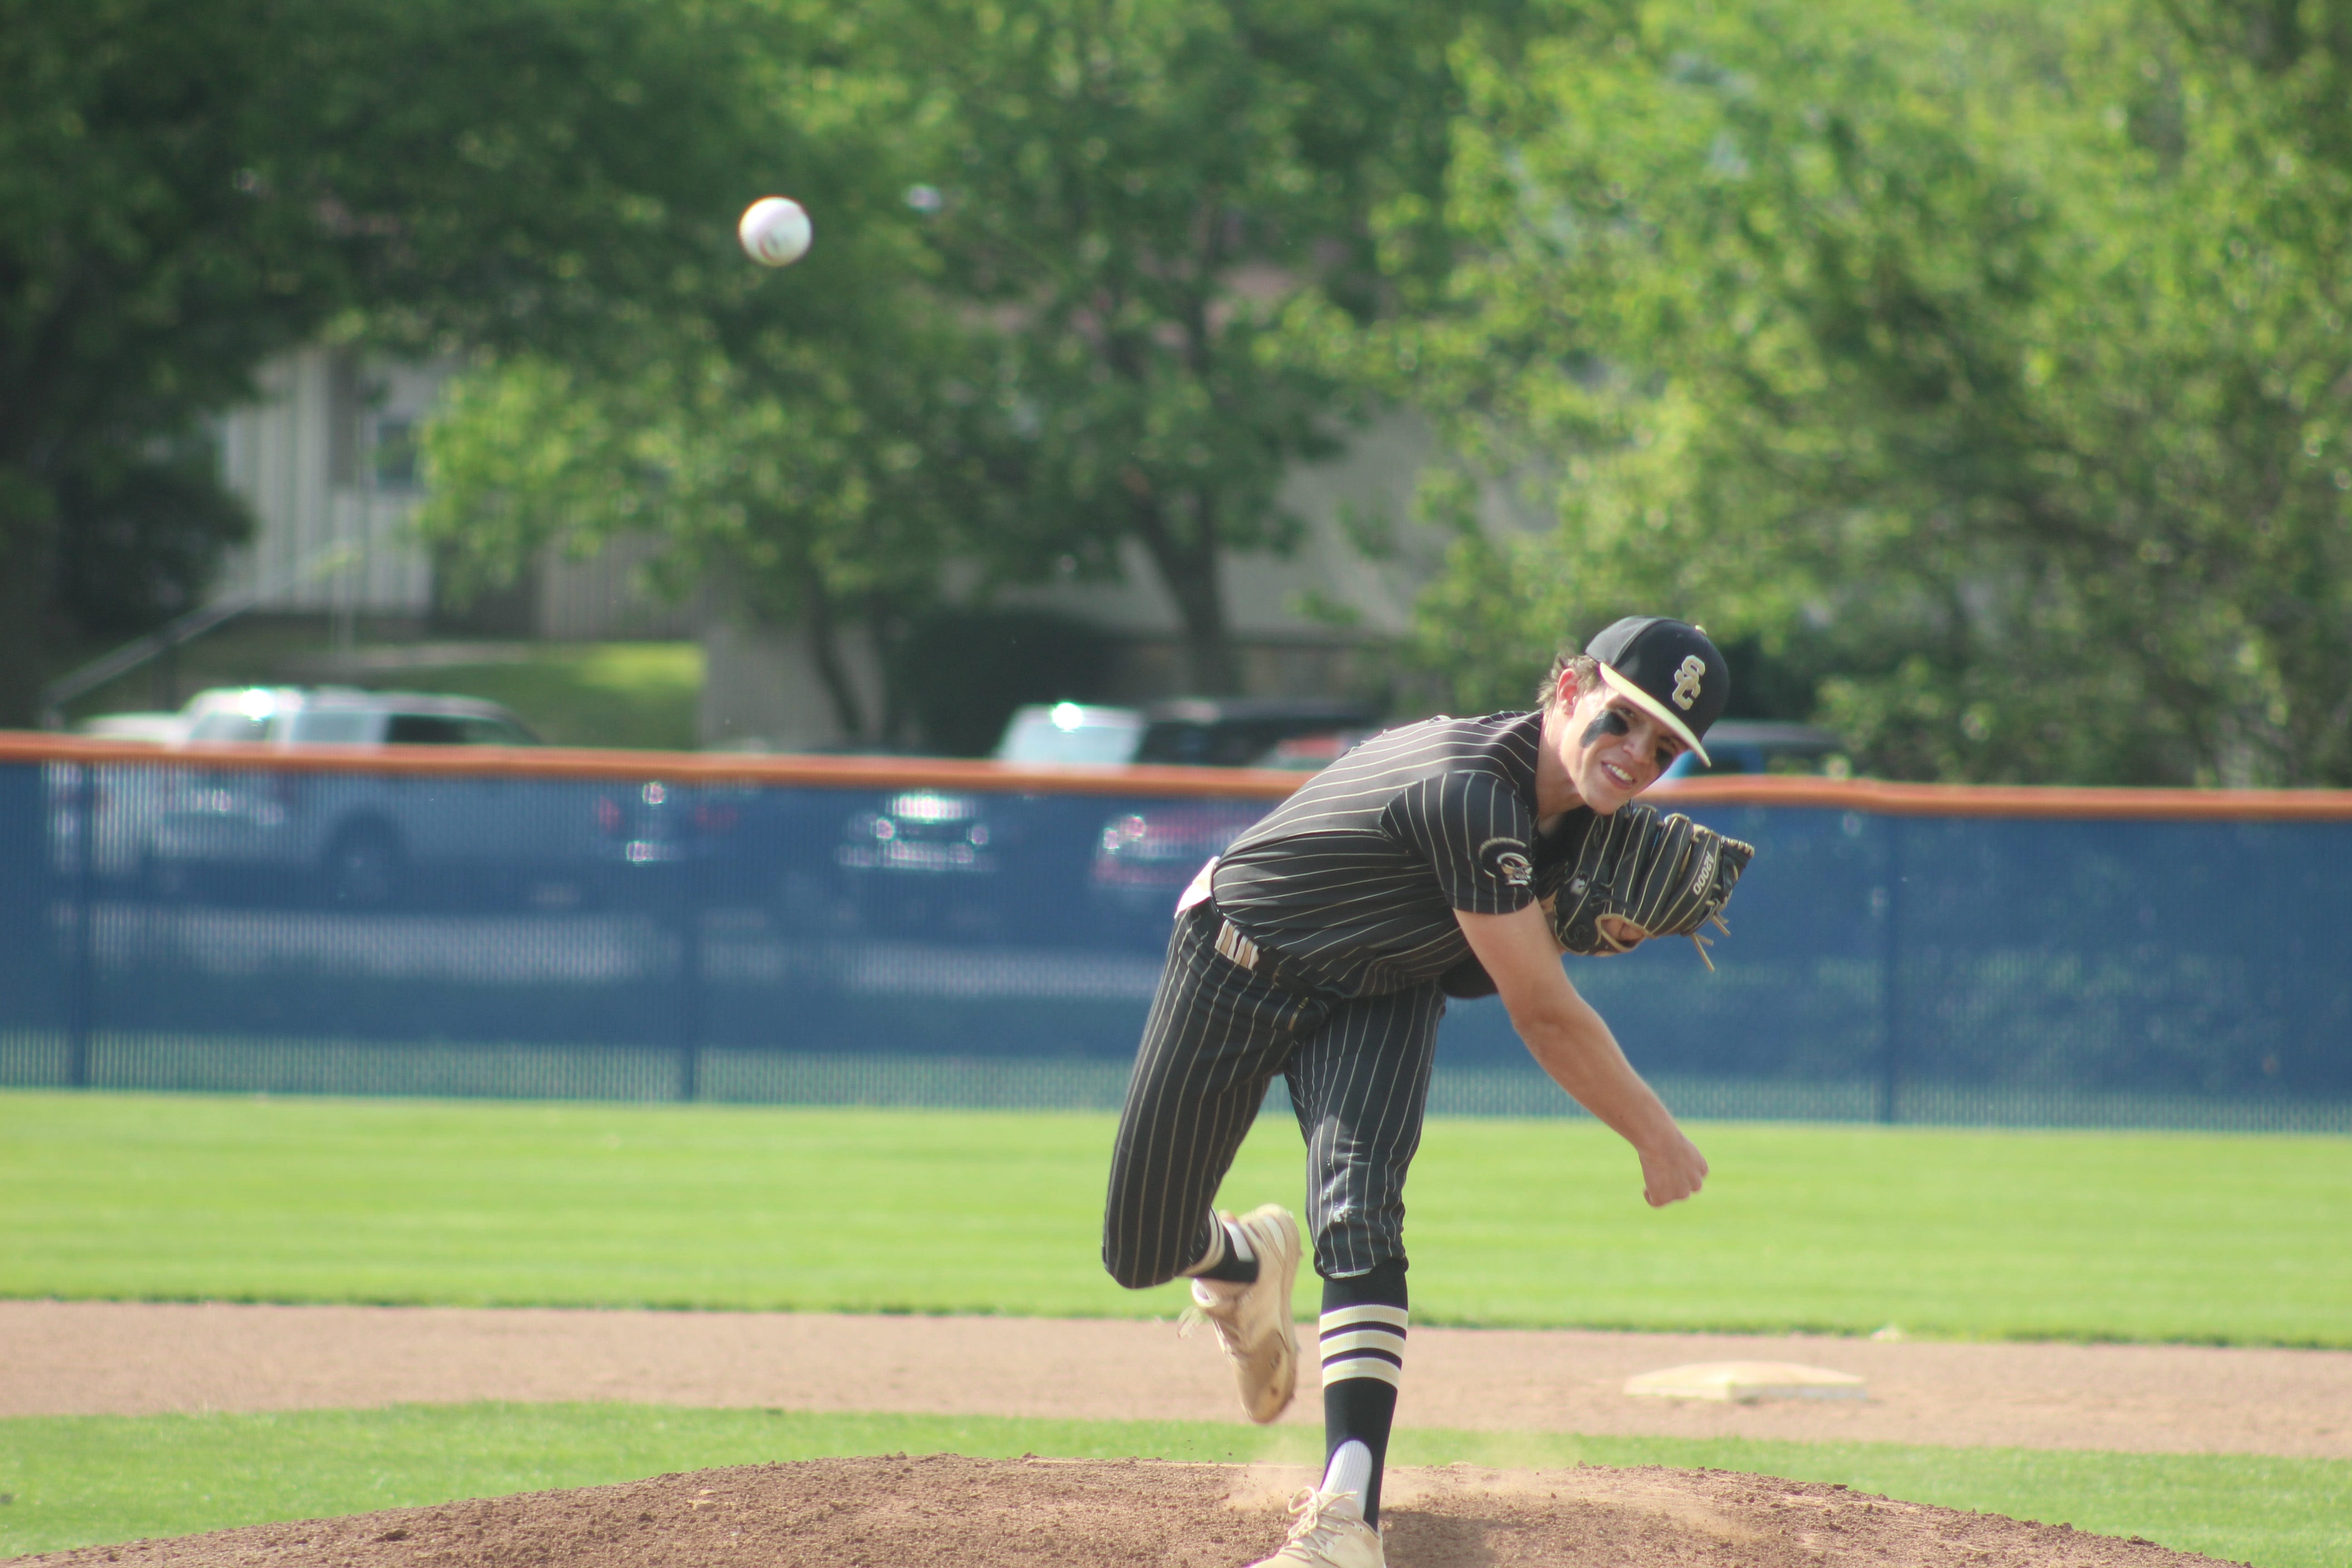 Hauler's three-hit shutout lifts South Central to district title win over Seneca East